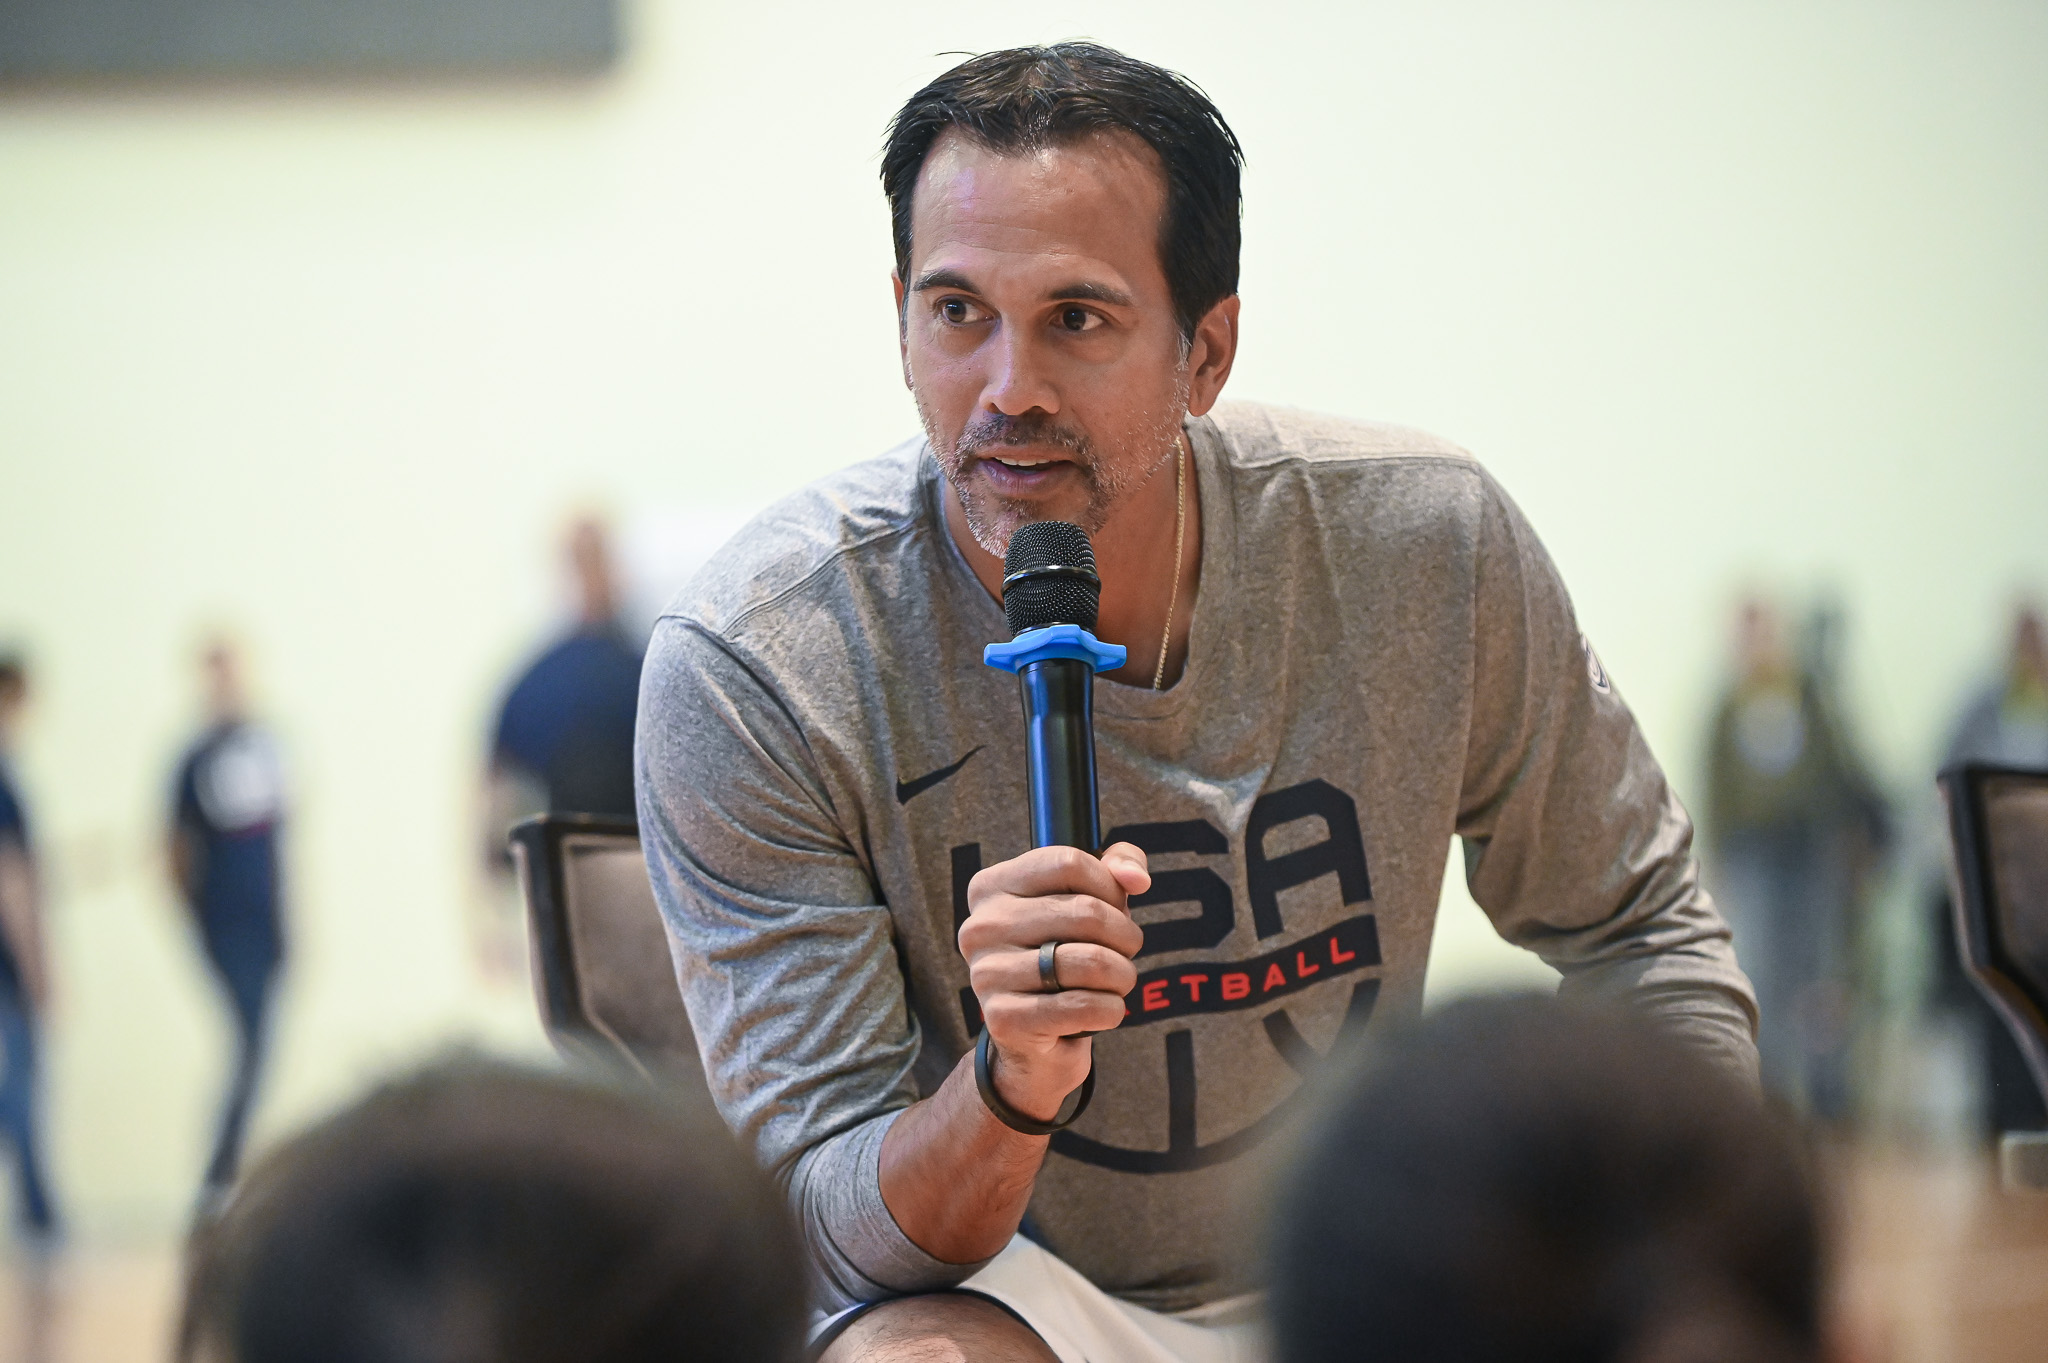 Team USA assistant coach Erik Spoelstra conducting a basketball clinic in Manila, Philippines ahead of the 2023 FIBA World Cup